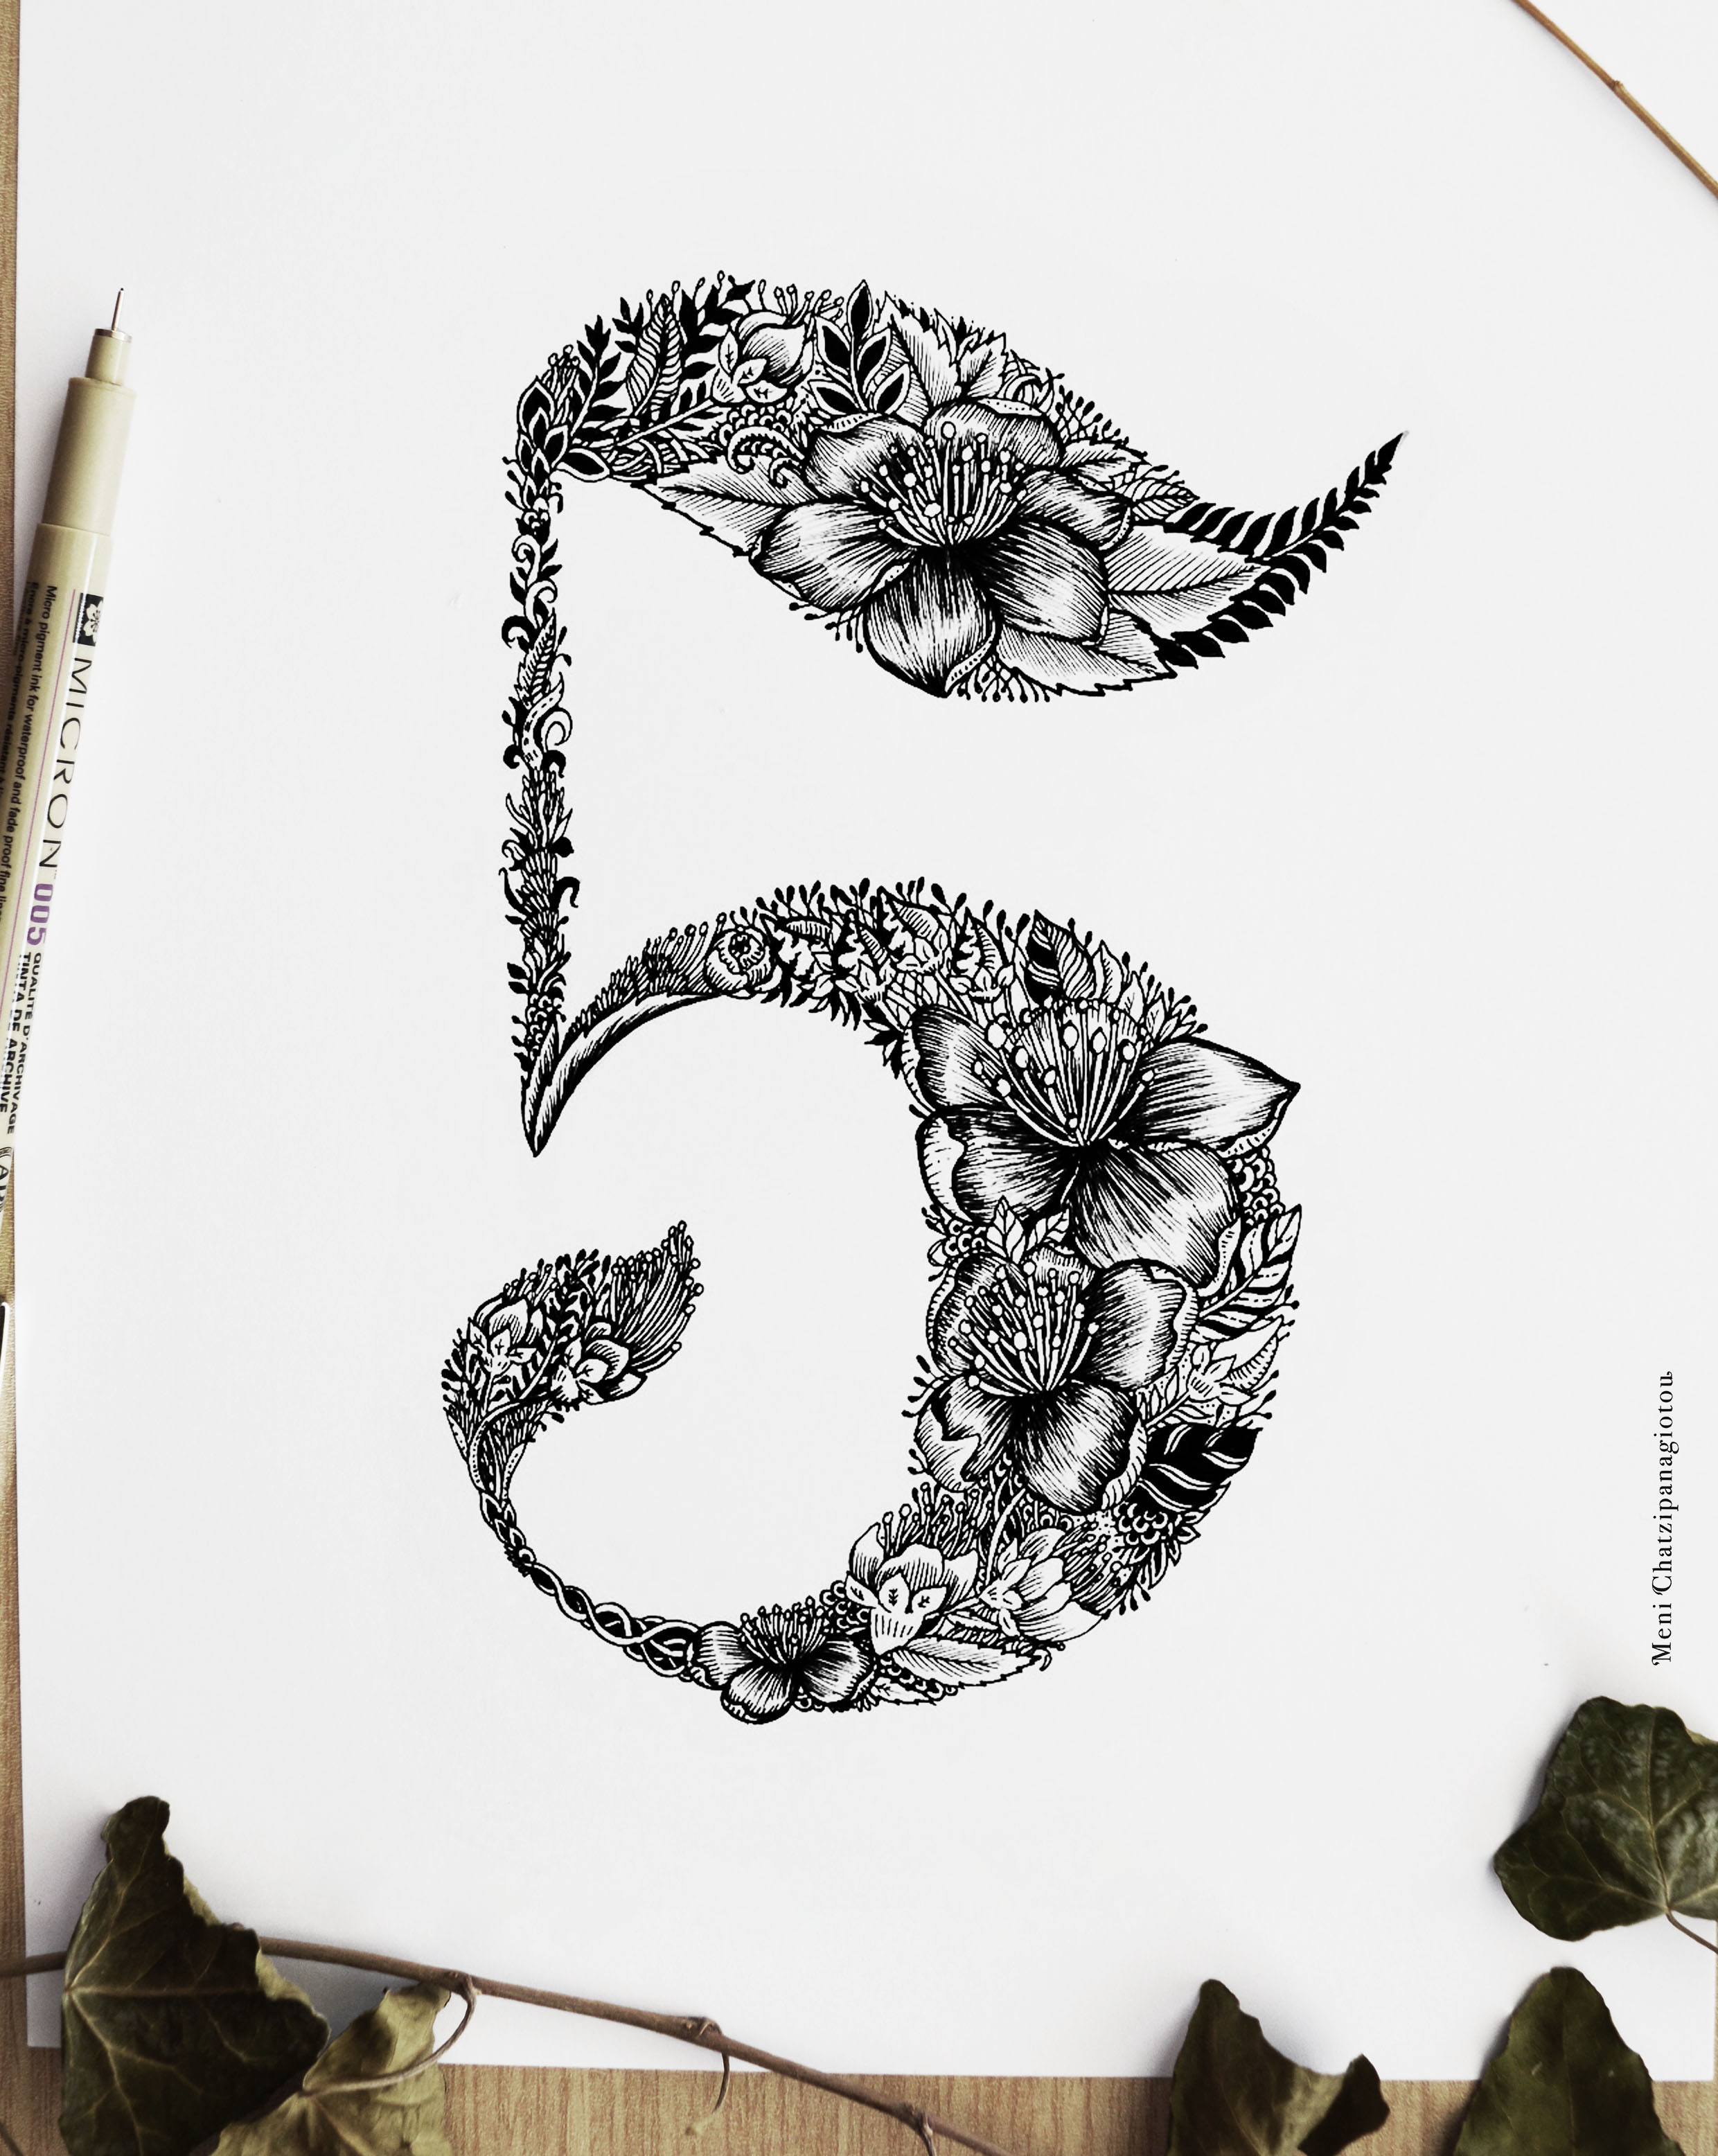 Lettering Illustrations by Meni Chatzipanagiotou